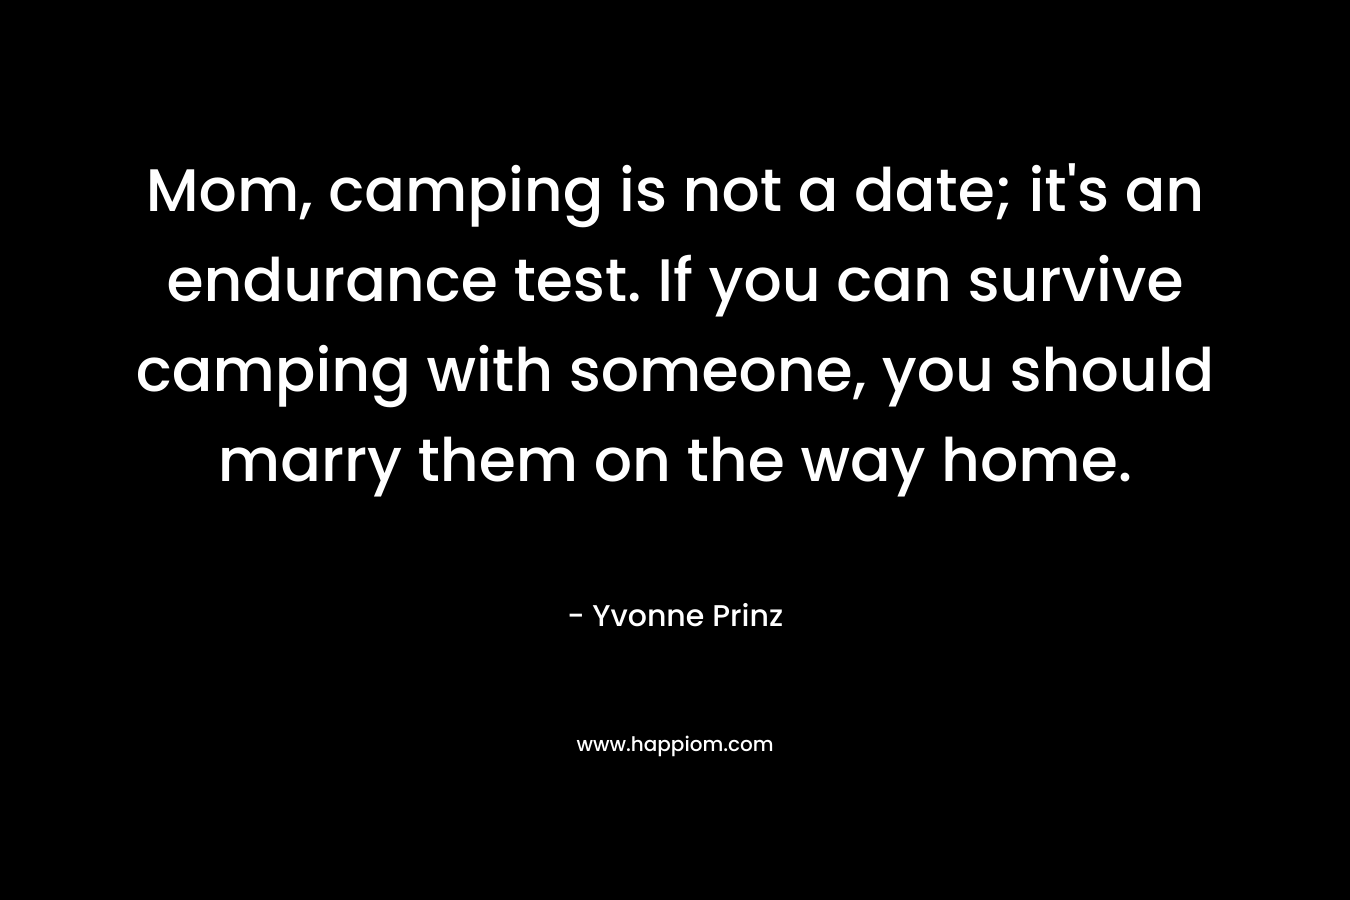 Mom, camping is not a date; it’s an endurance test. If you can survive camping with someone, you should marry them on the way home. – Yvonne Prinz